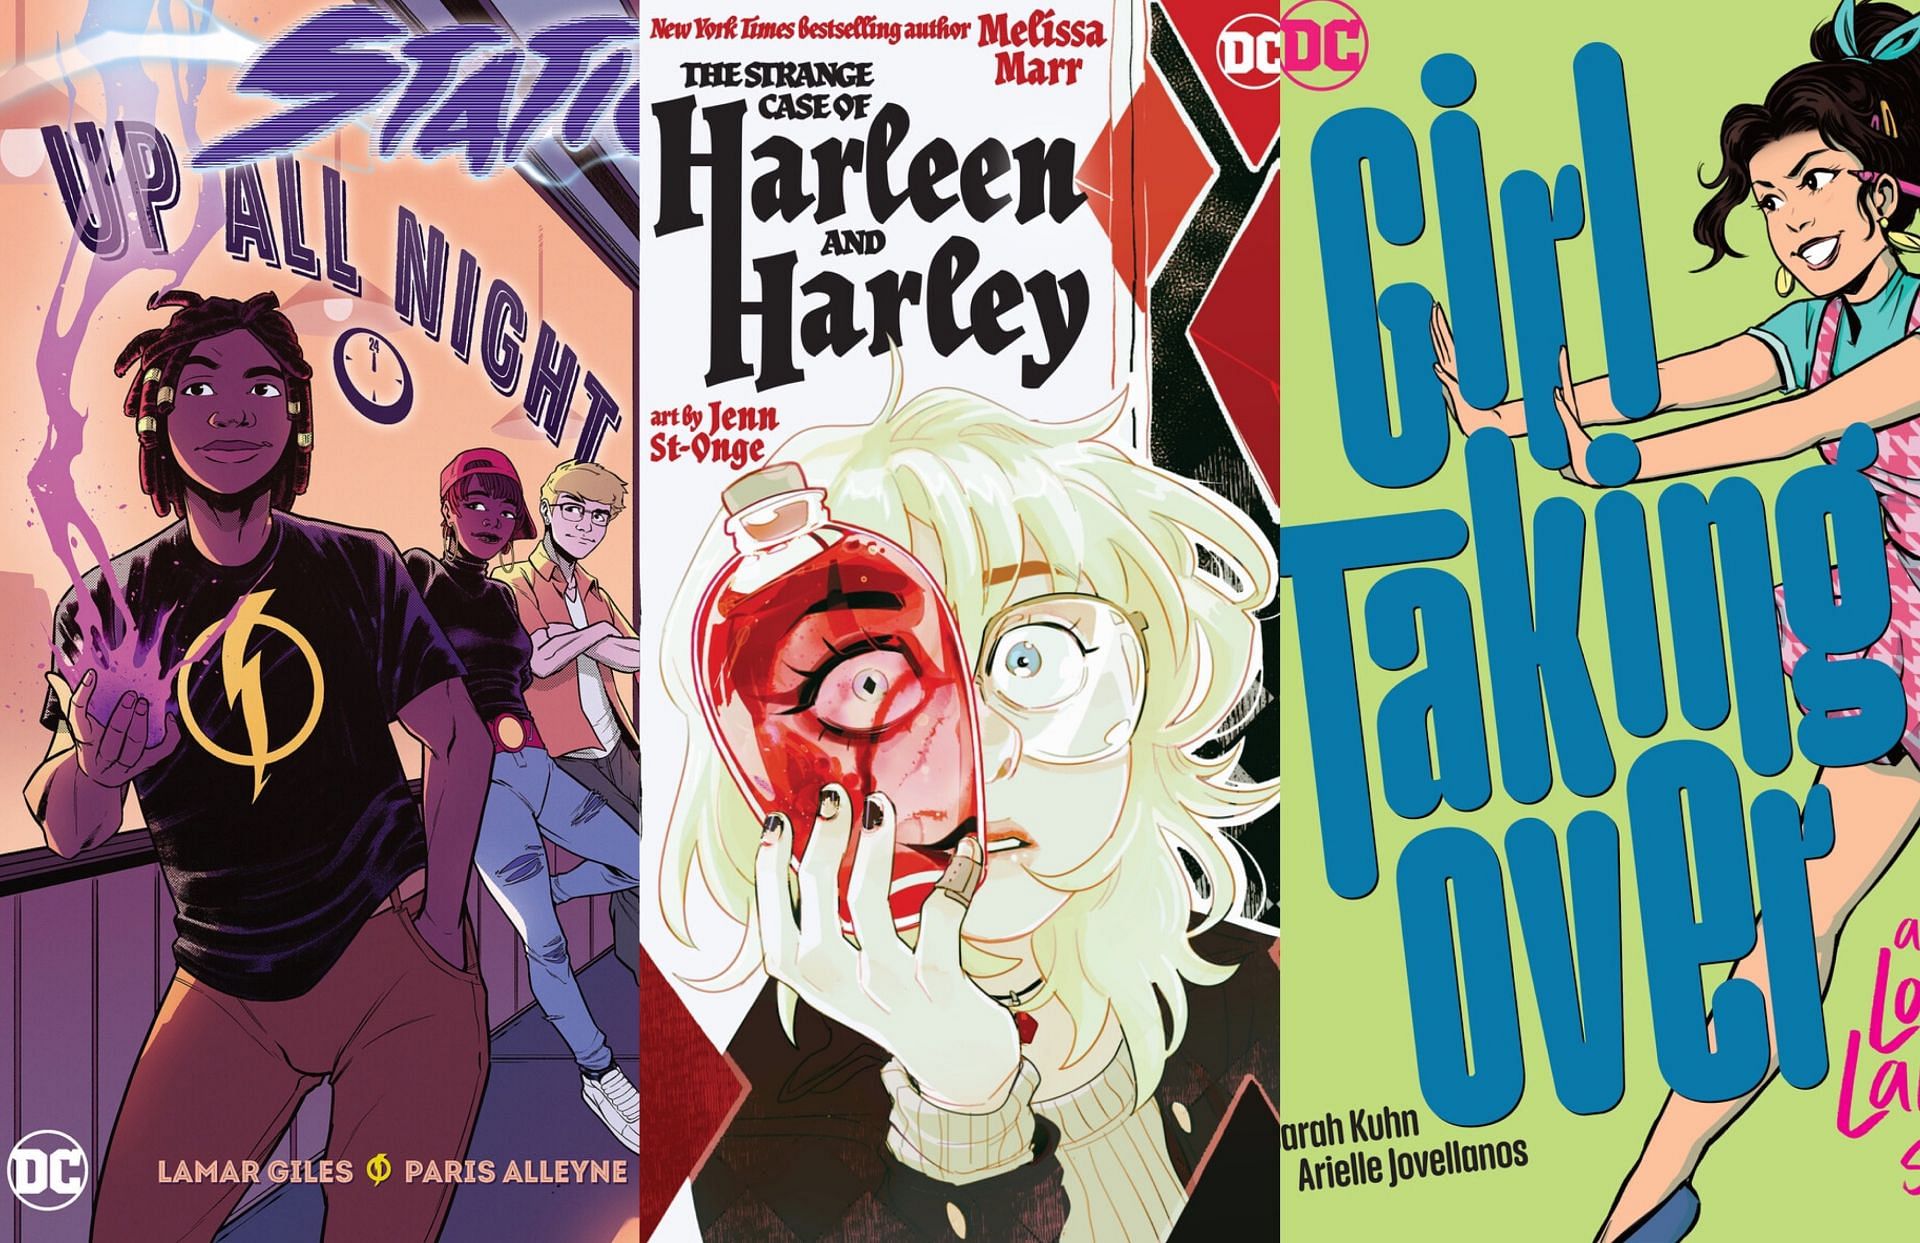 Up All Night/ The Strange Case of Harleen and Harley/ Girl Taking Over (Images via DC Comics)